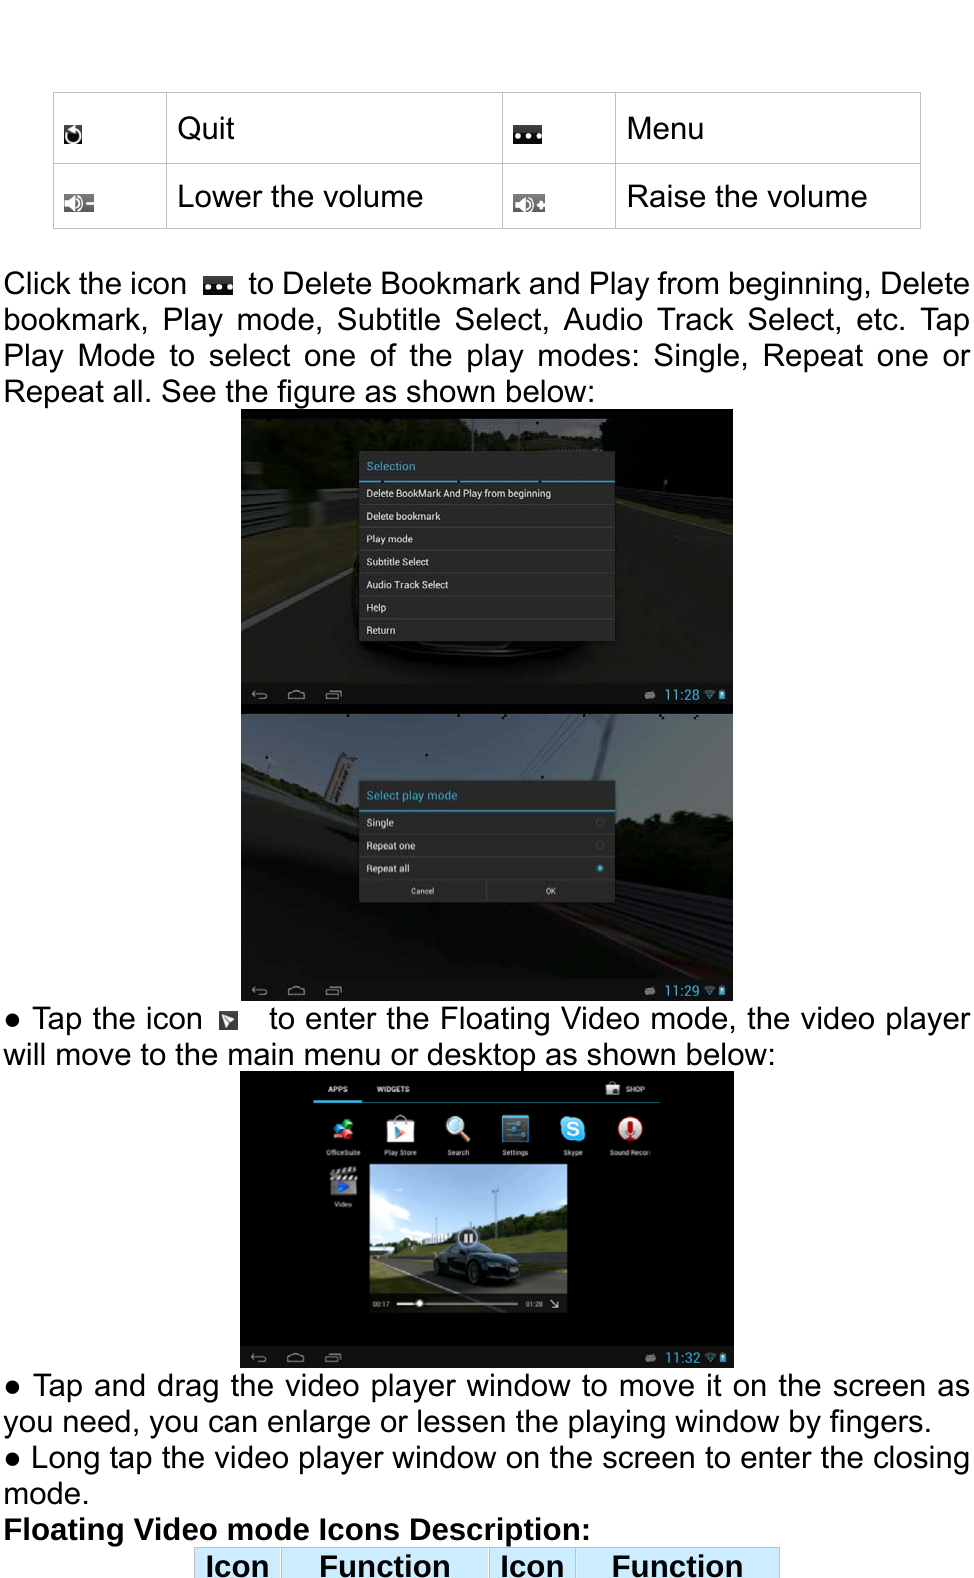    Quit   Menu   Lower the volume   Raise the volume  Click the icon    to Delete Bookmark and Play from beginning, Delete bookmark, Play mode, Subtitle Select, Audio Track Select, etc. Tap Play Mode to select one of the play modes: Single, Repeat one or Repeat all. See the figure as shown below:     ● Tap the icon      to enter the Floating Video mode, the video player will move to the main menu or desktop as shown below:    ● Tap and drag the video player window to move it on the screen as you need, you can enlarge or lessen the playing window by fingers.   ● Long tap the video player window on the screen to enter the closing mode.  Floating Video mode Icons Description:   Icon  Function  Icon Function 